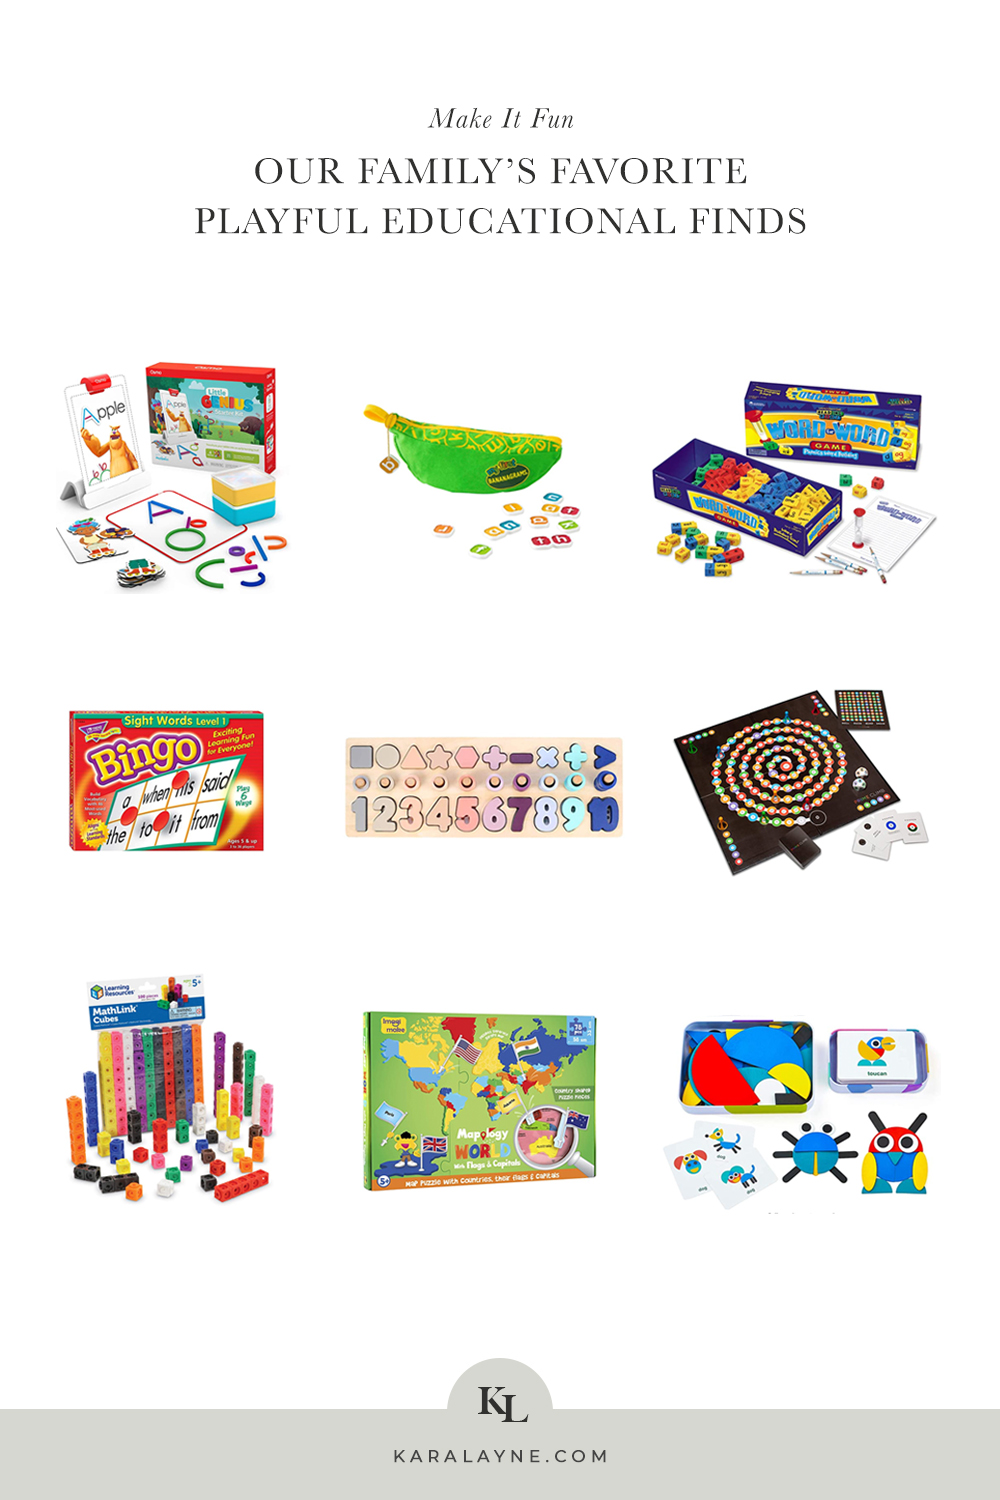 Our family's favorite educational games and toys for learning at home and that help in our homeschooling. Catch it all over on KaraLayne.com!